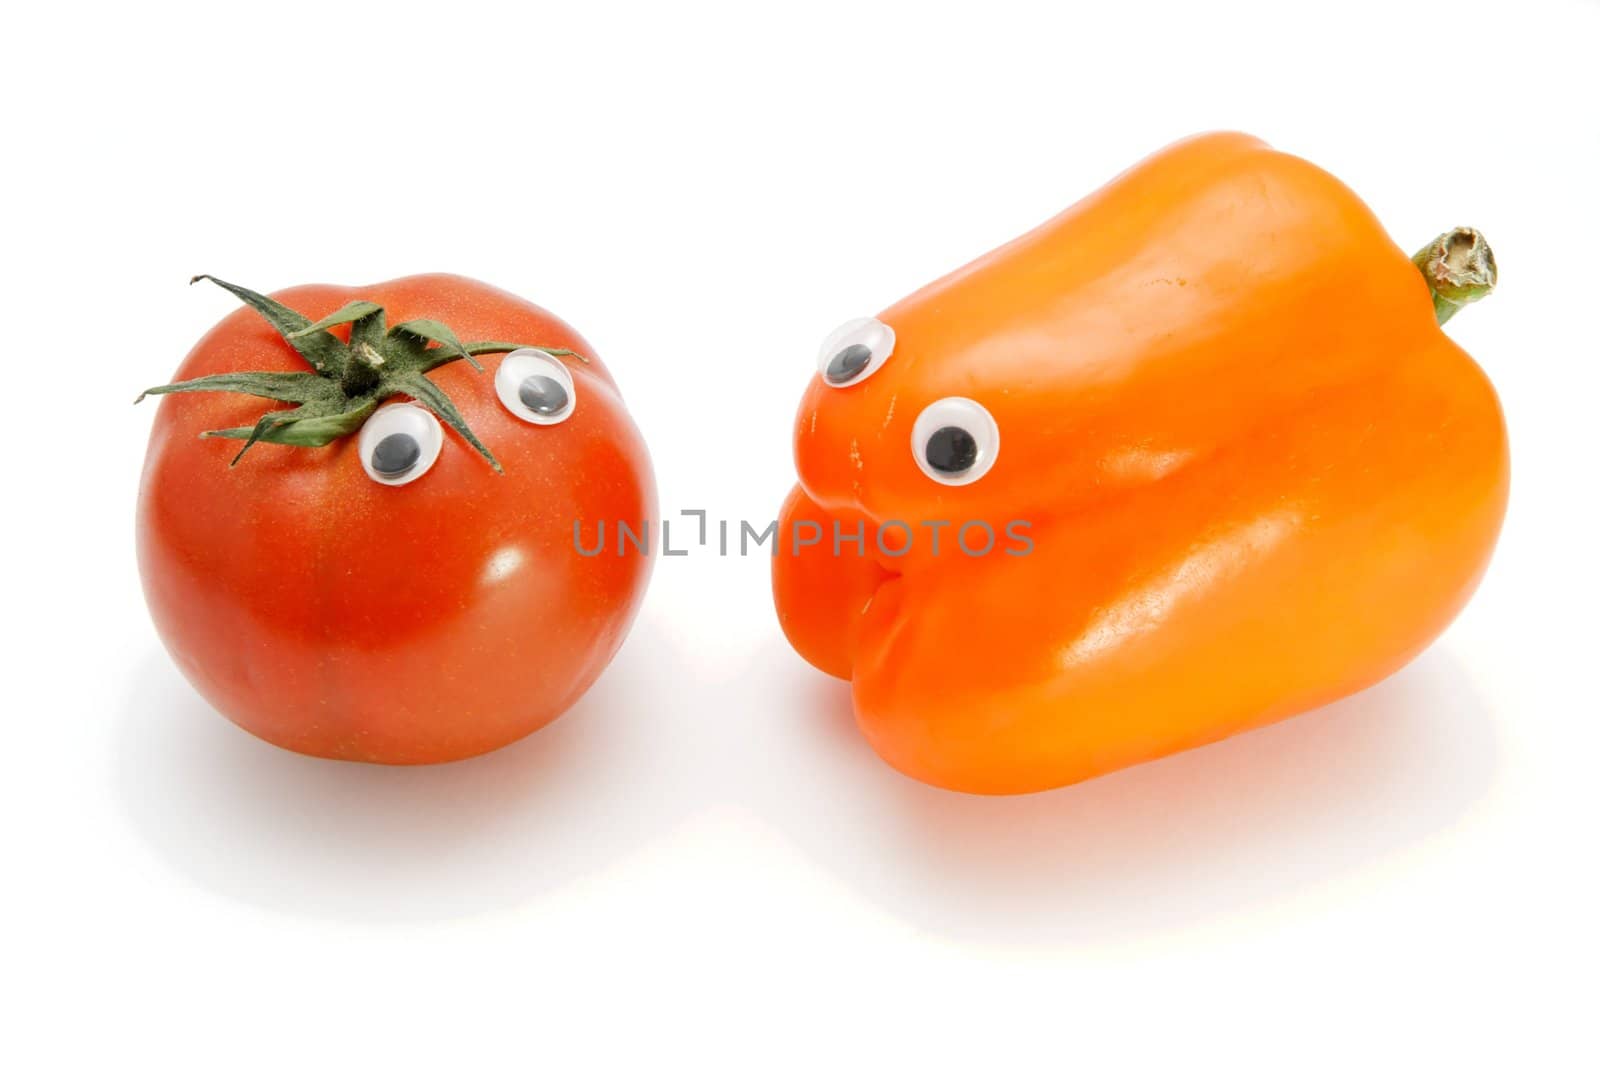 Red tomato and orange bellpepper with eyes on white background